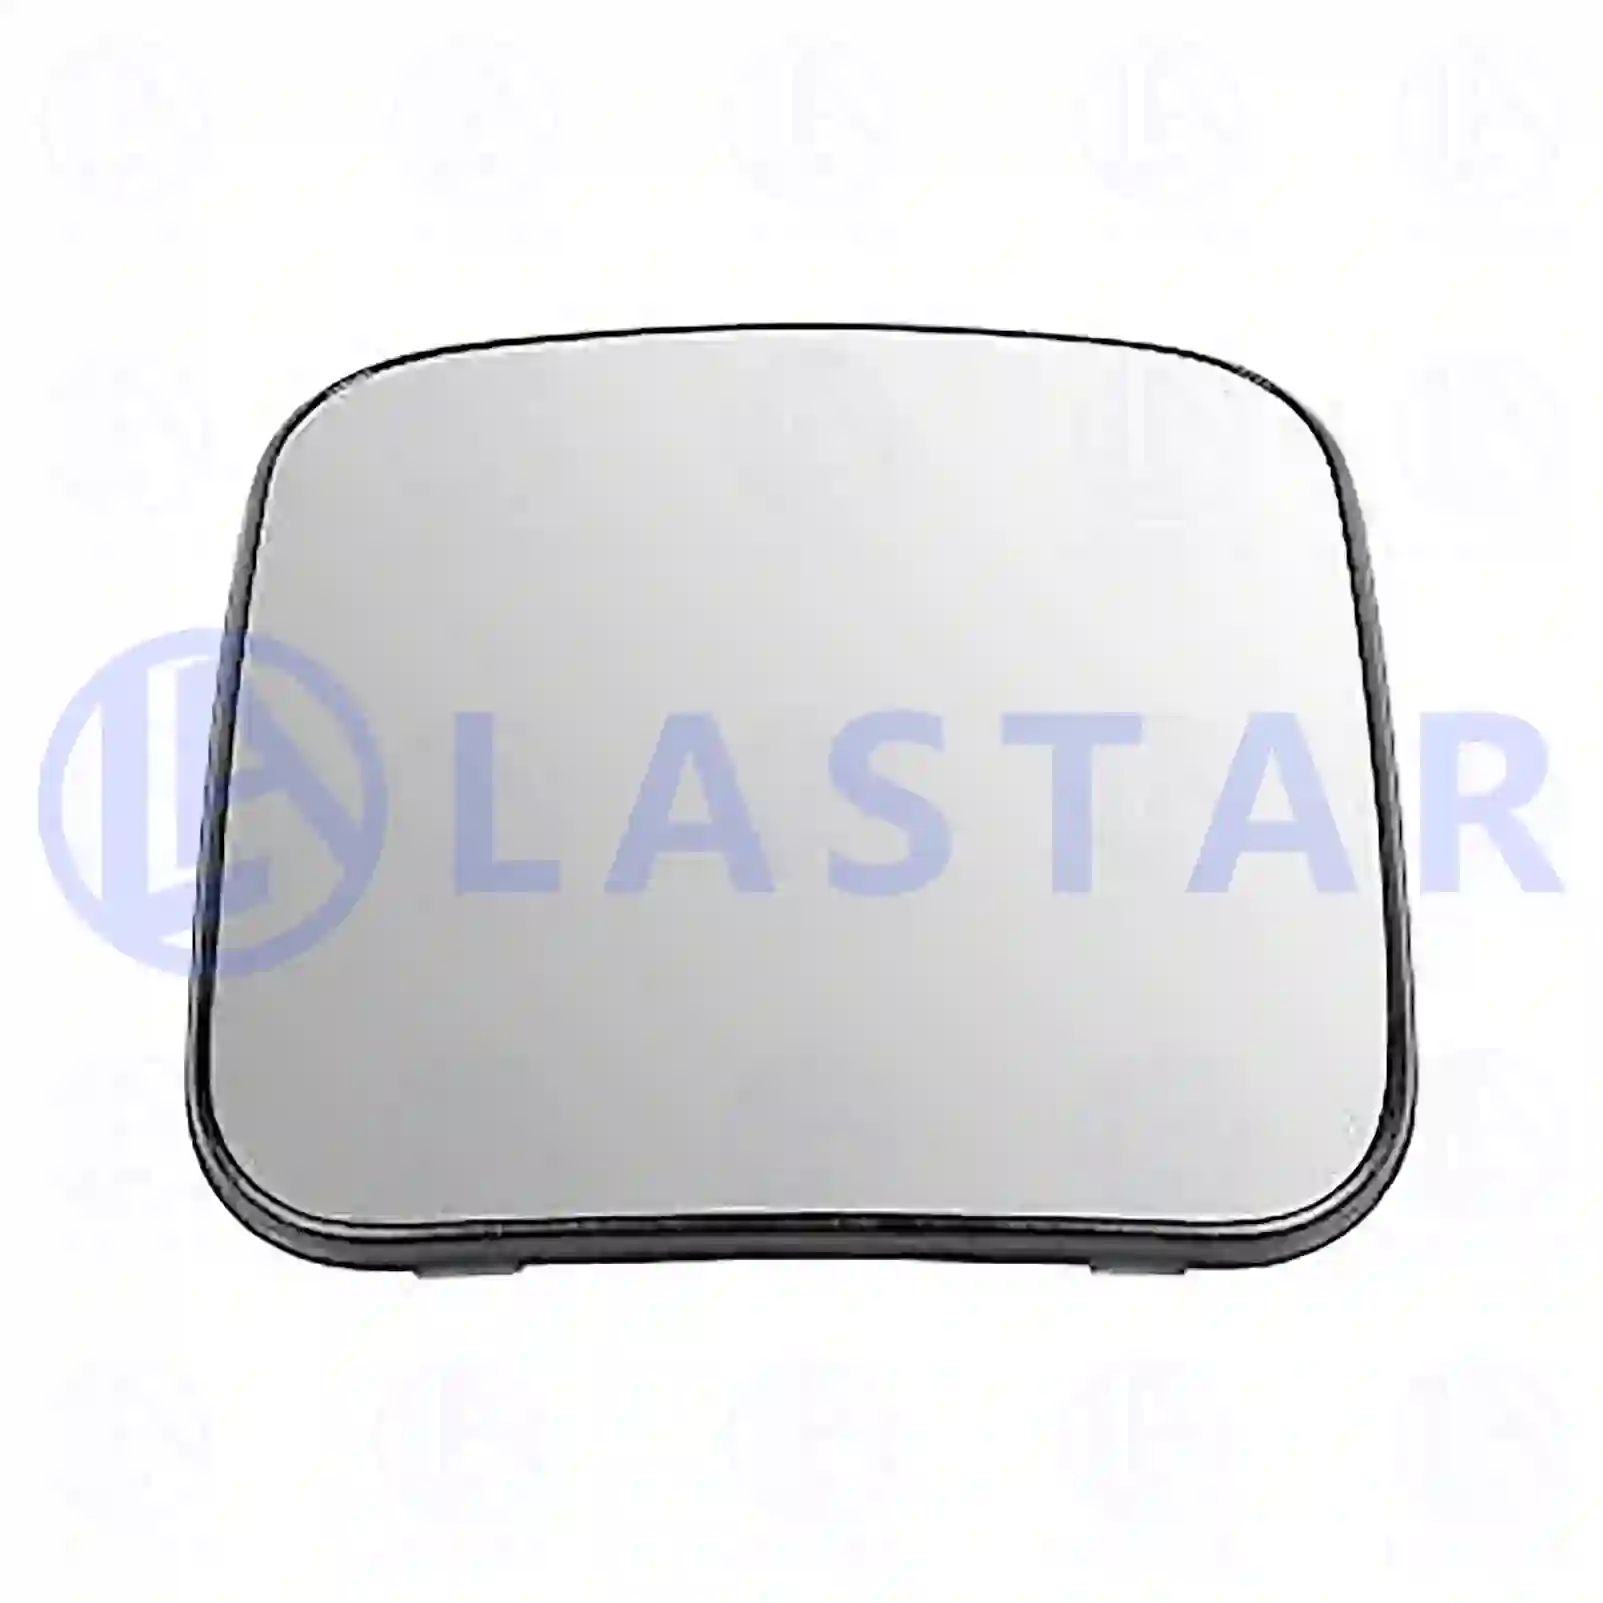 Mirror glass, wide view mirror, heated, 77718887, 0018112133, ZG61018-0008 ||  77718887 Lastar Spare Part | Truck Spare Parts, Auotomotive Spare Parts Mirror glass, wide view mirror, heated, 77718887, 0018112133, ZG61018-0008 ||  77718887 Lastar Spare Part | Truck Spare Parts, Auotomotive Spare Parts